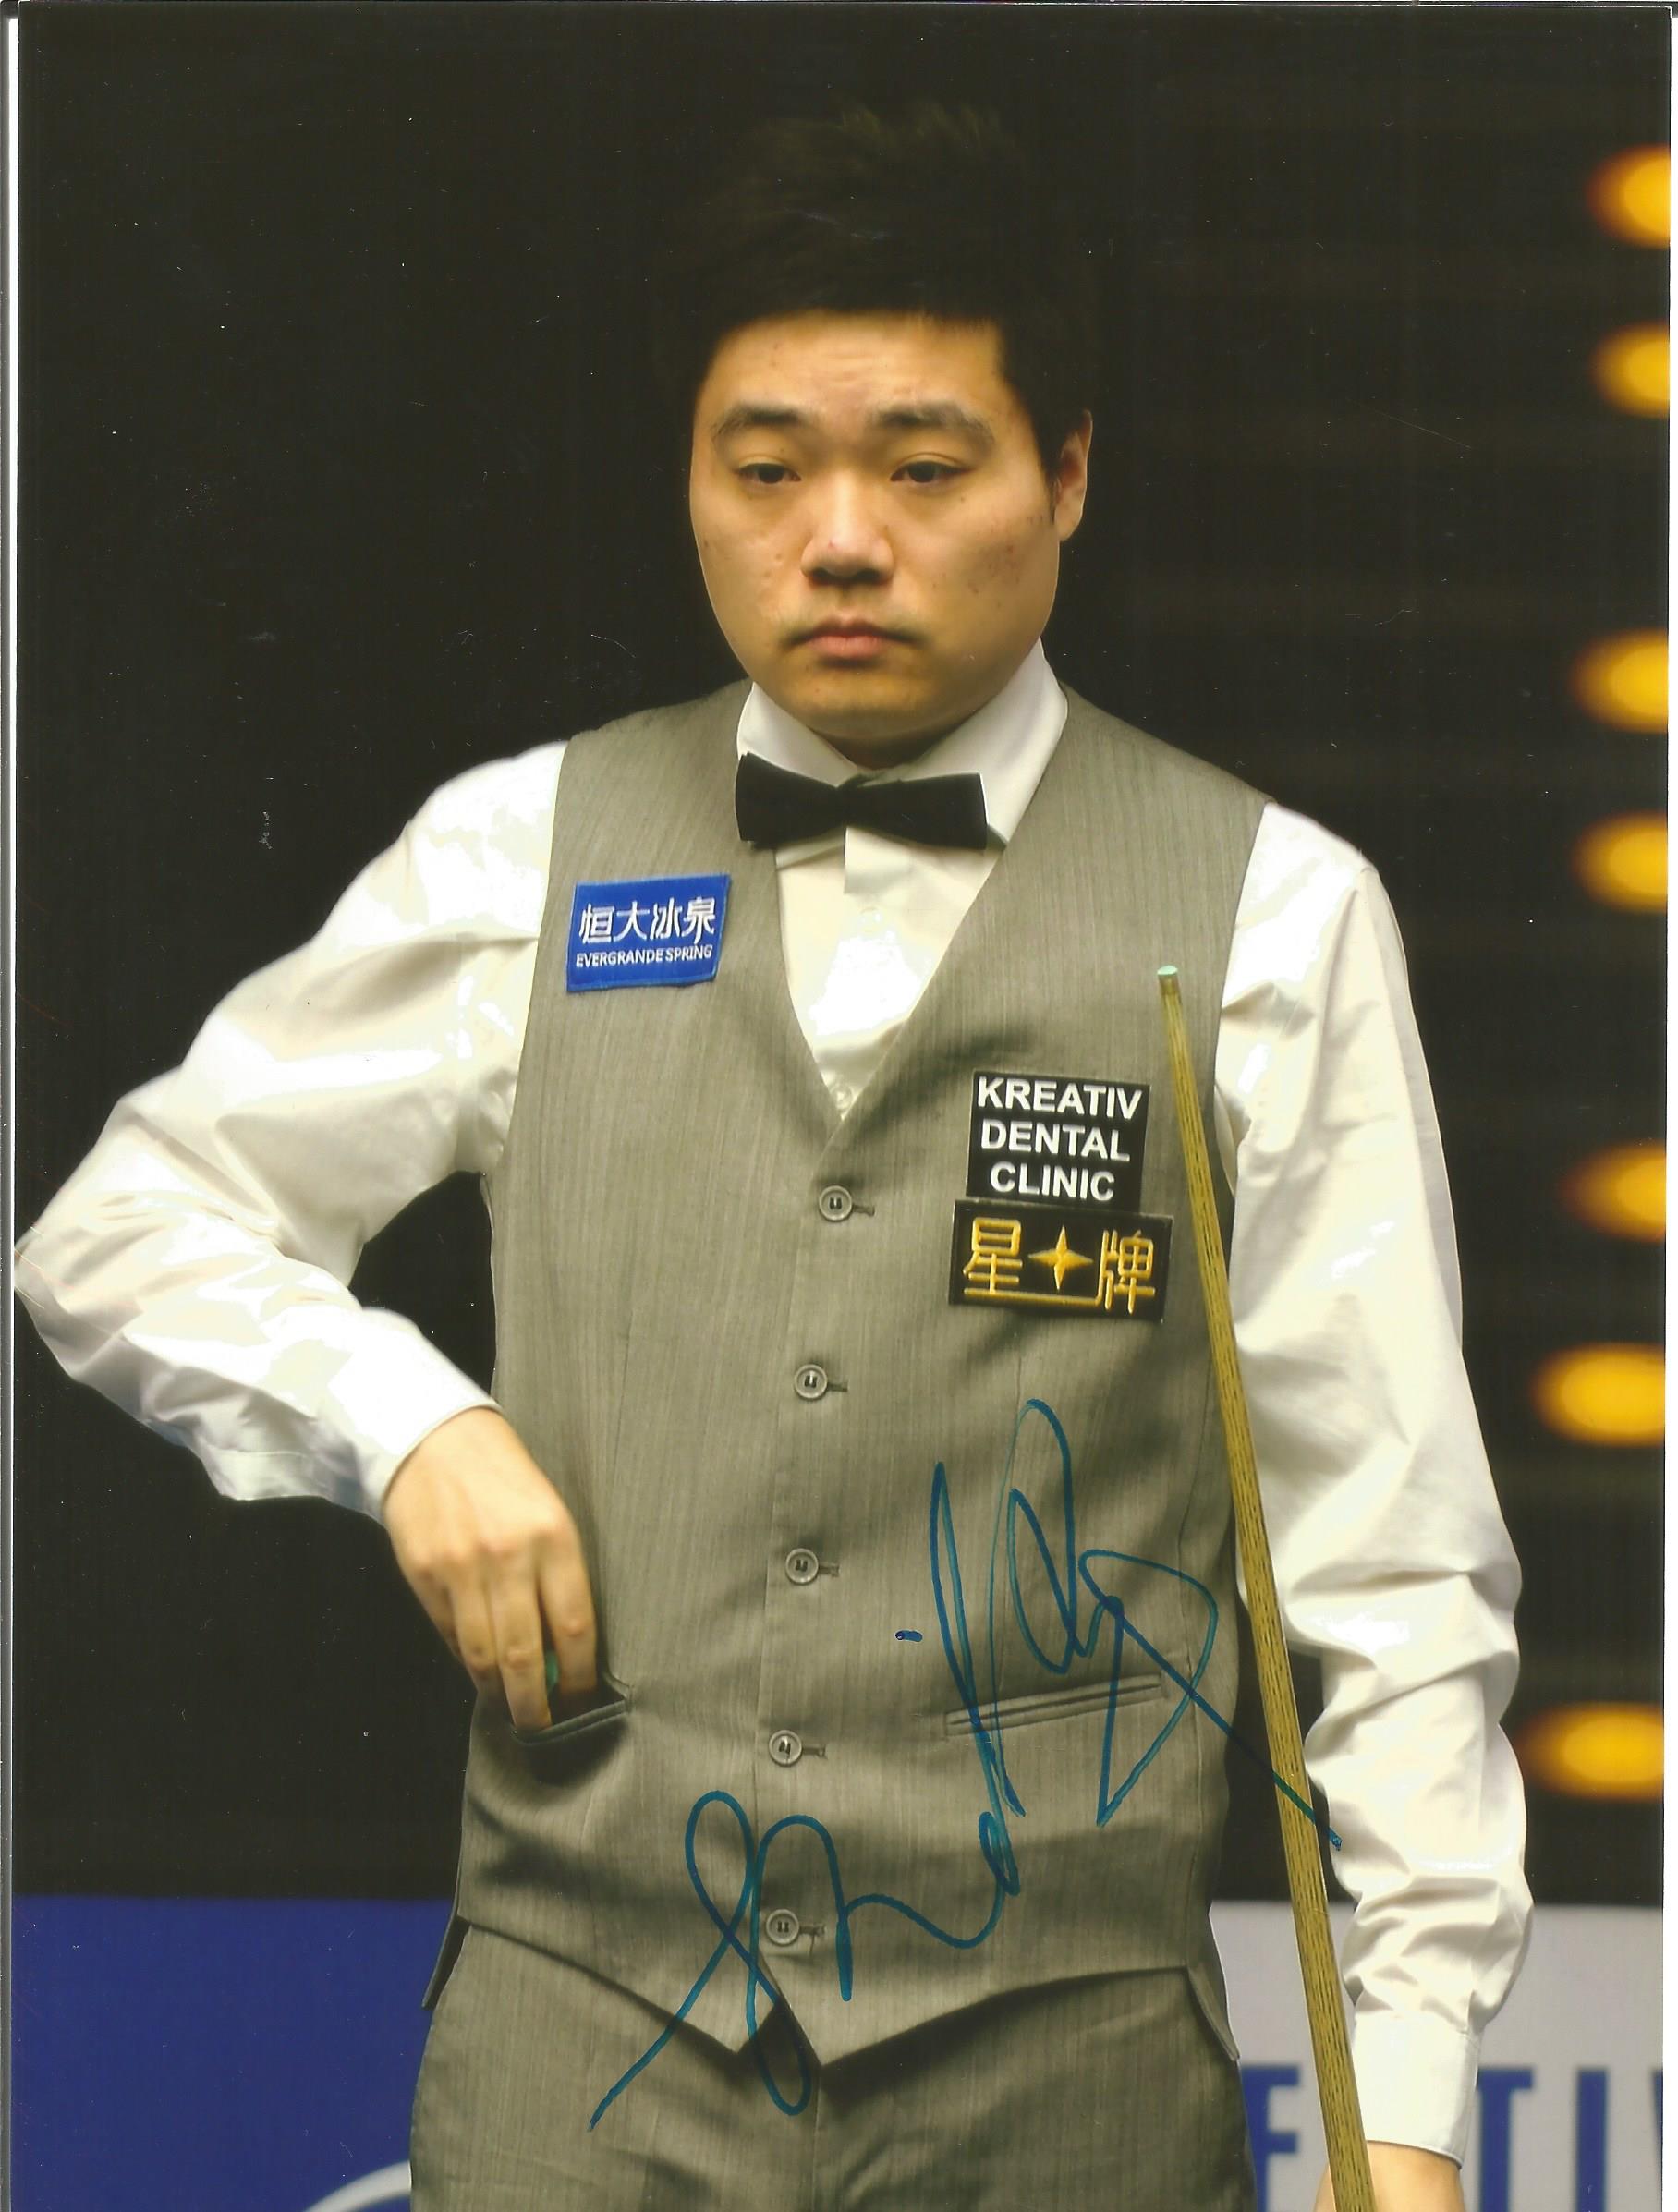 Snooker collection. 6 8x6 colour photos. Individually signed by Stuart Bingham, Judd Trump, DIng Jun - Image 5 of 6